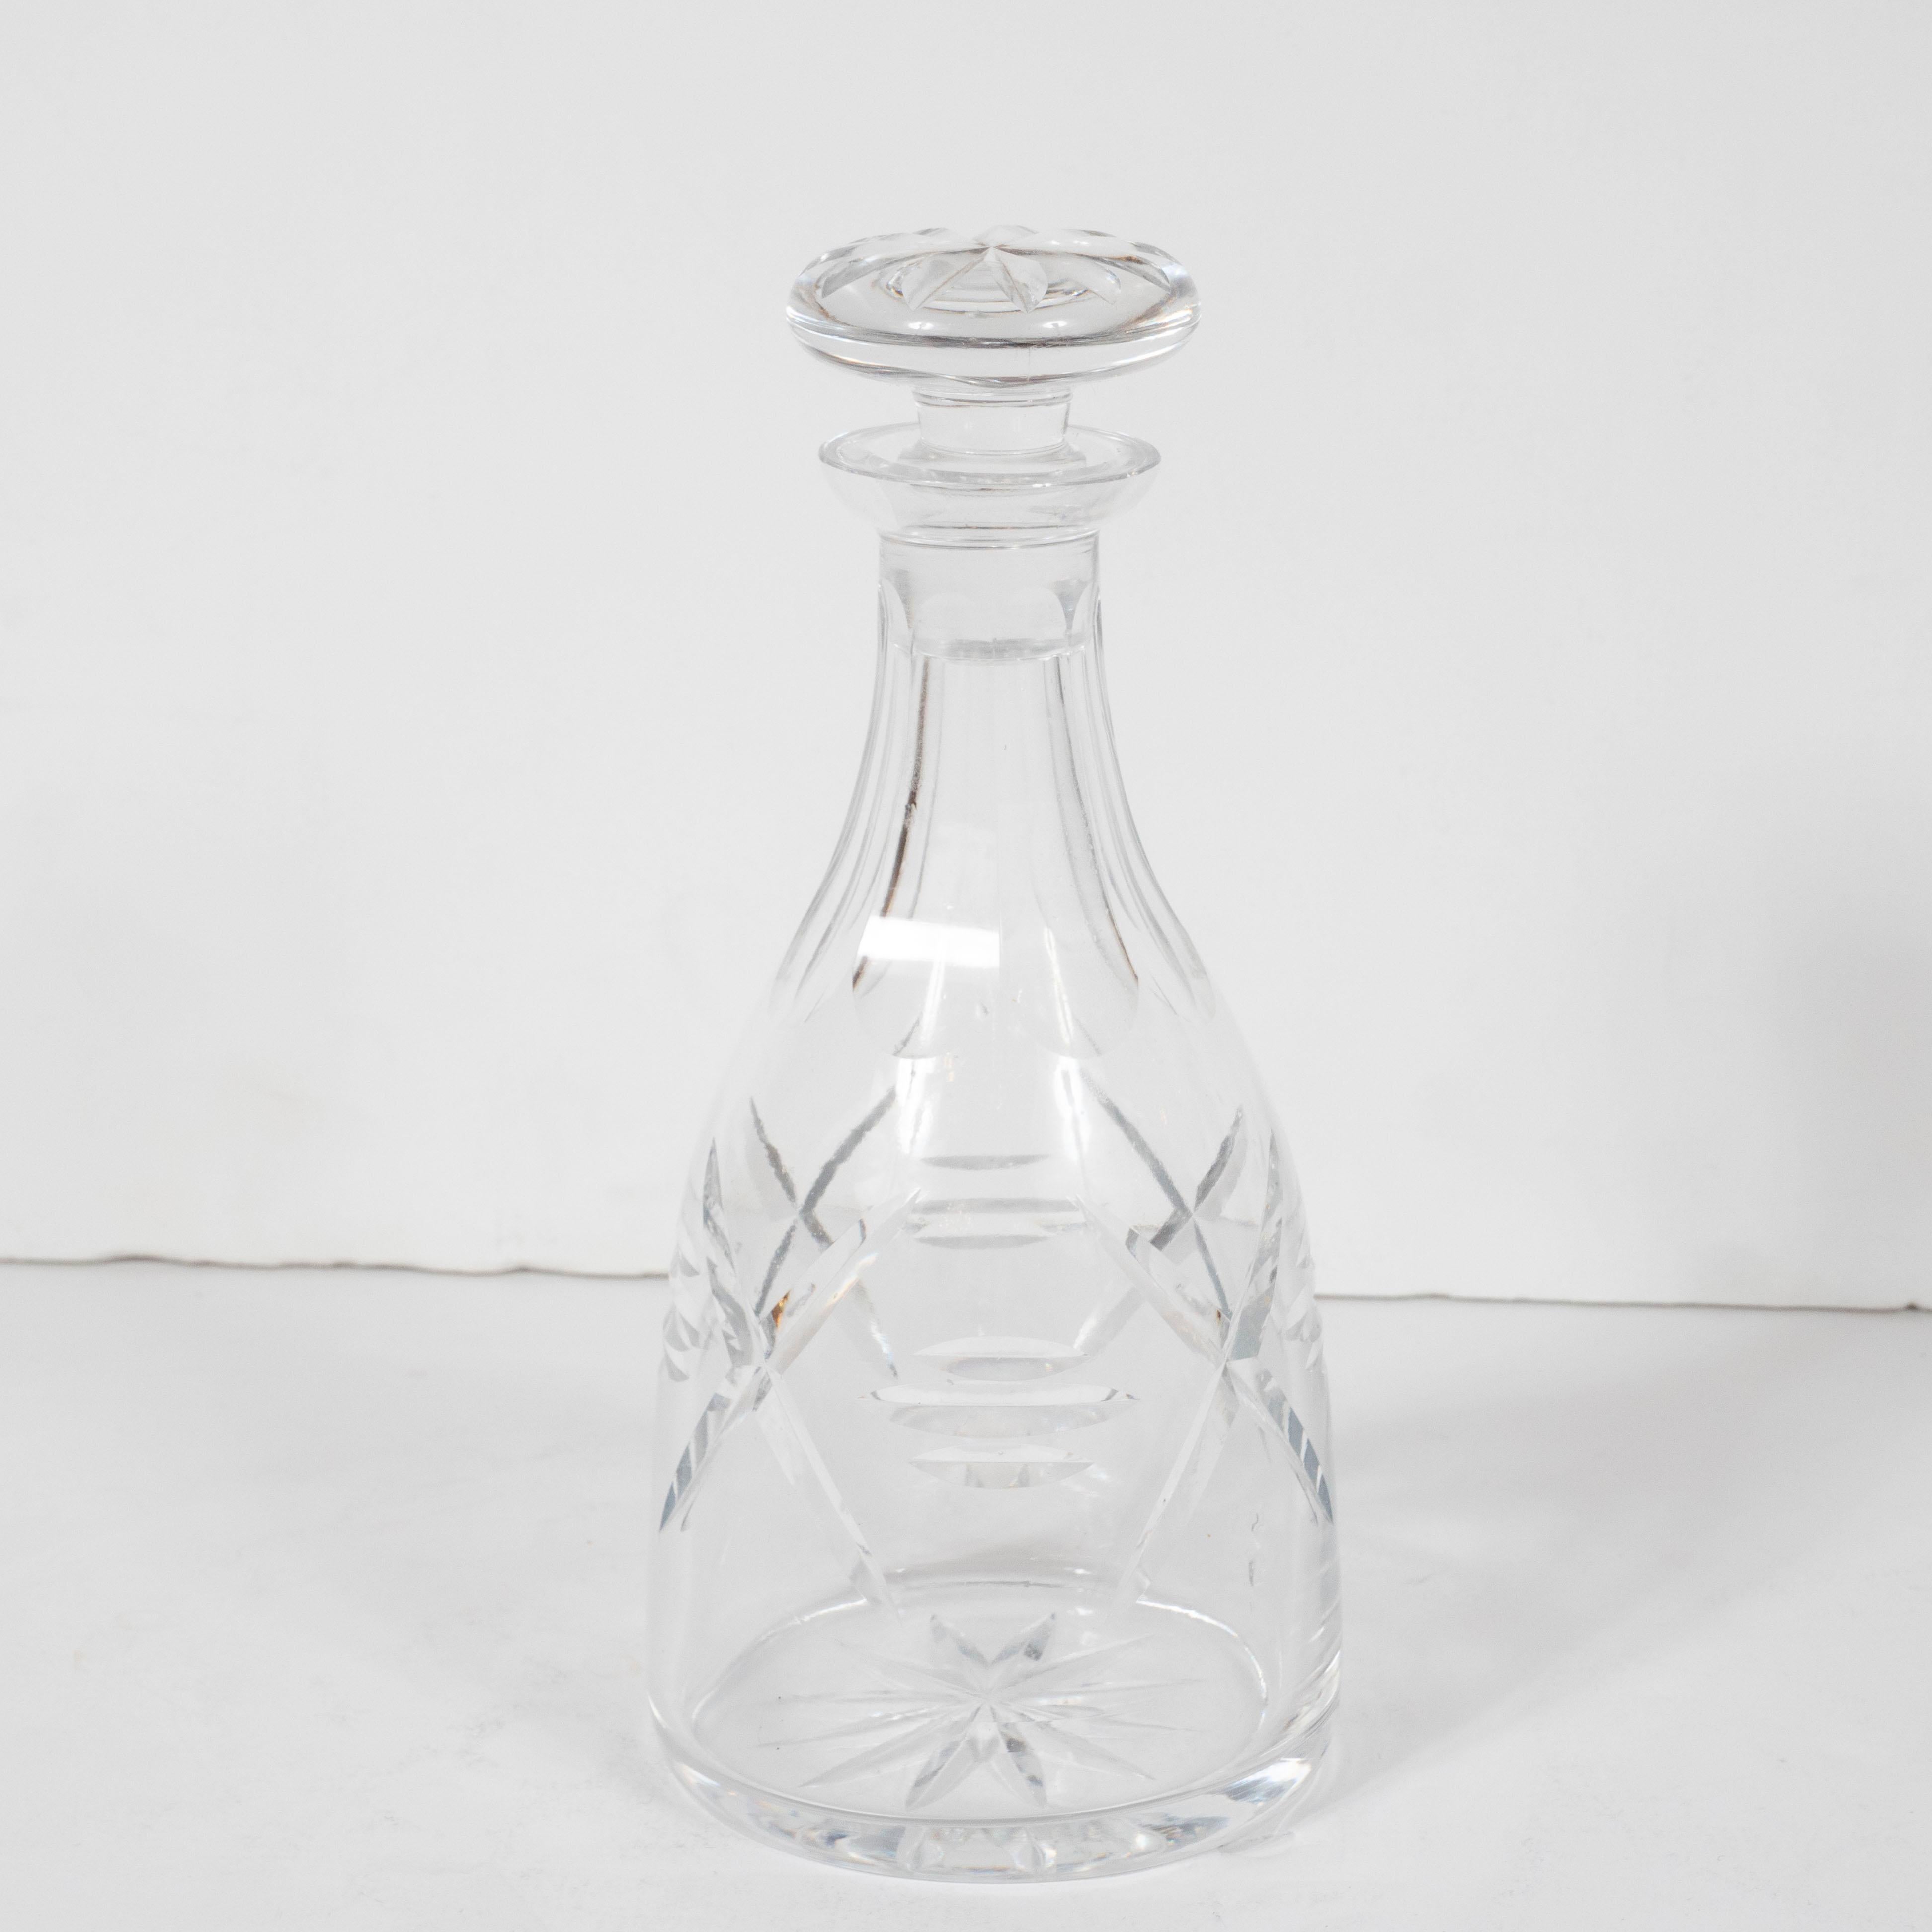 This refined Mid-Century Modern decanter was realized in the United States, circa 1950. Realized in translucent glass with geometric forms incised into the exterior, this piece is as visually pleasing as it is functional. It would be an excellent